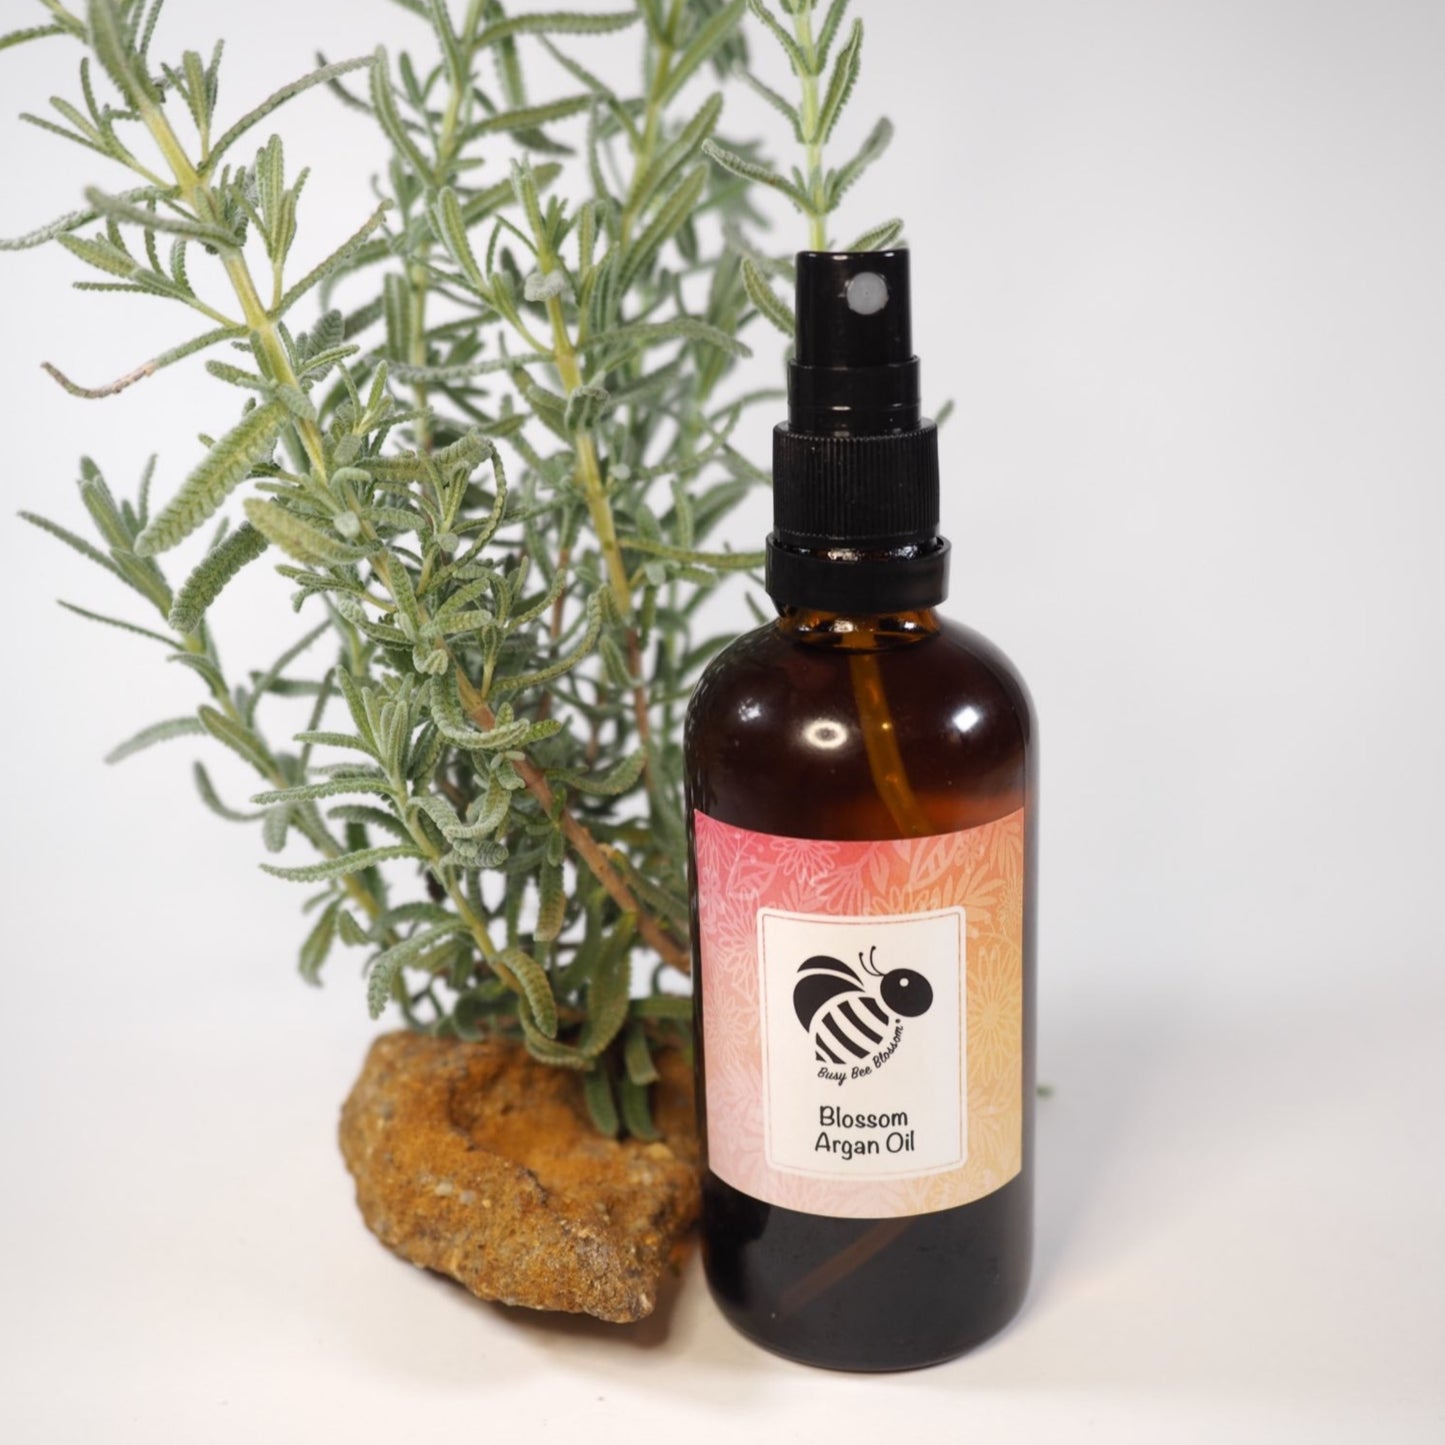 Blossom pure Moroccan Argan Oil with green sprigs in the background.